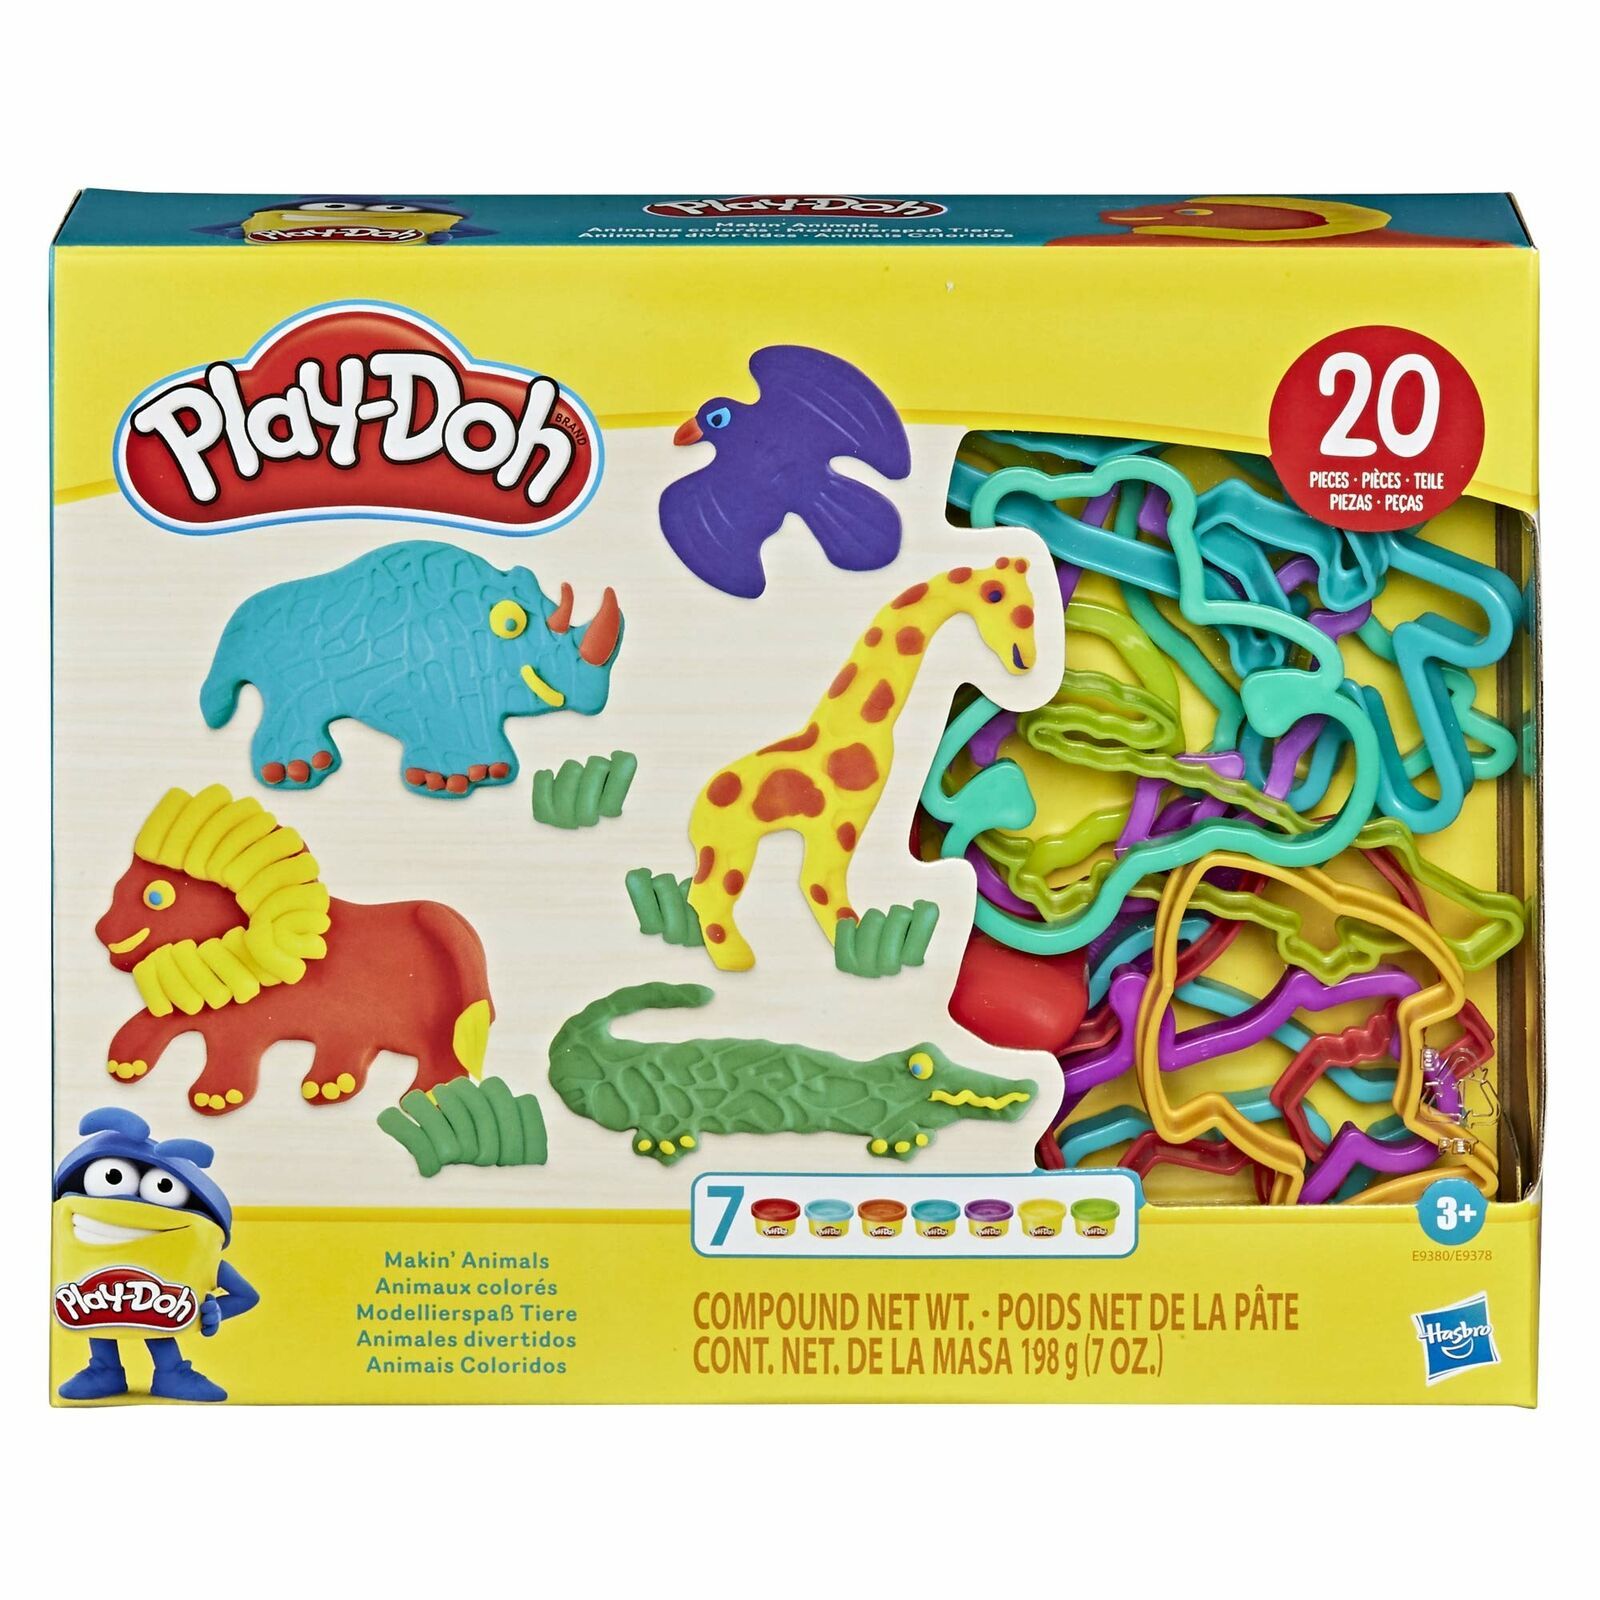 Play-Doh Makin' Animals Create It Kit for Kids 3 Years and Up with 7 Non-Toxi...